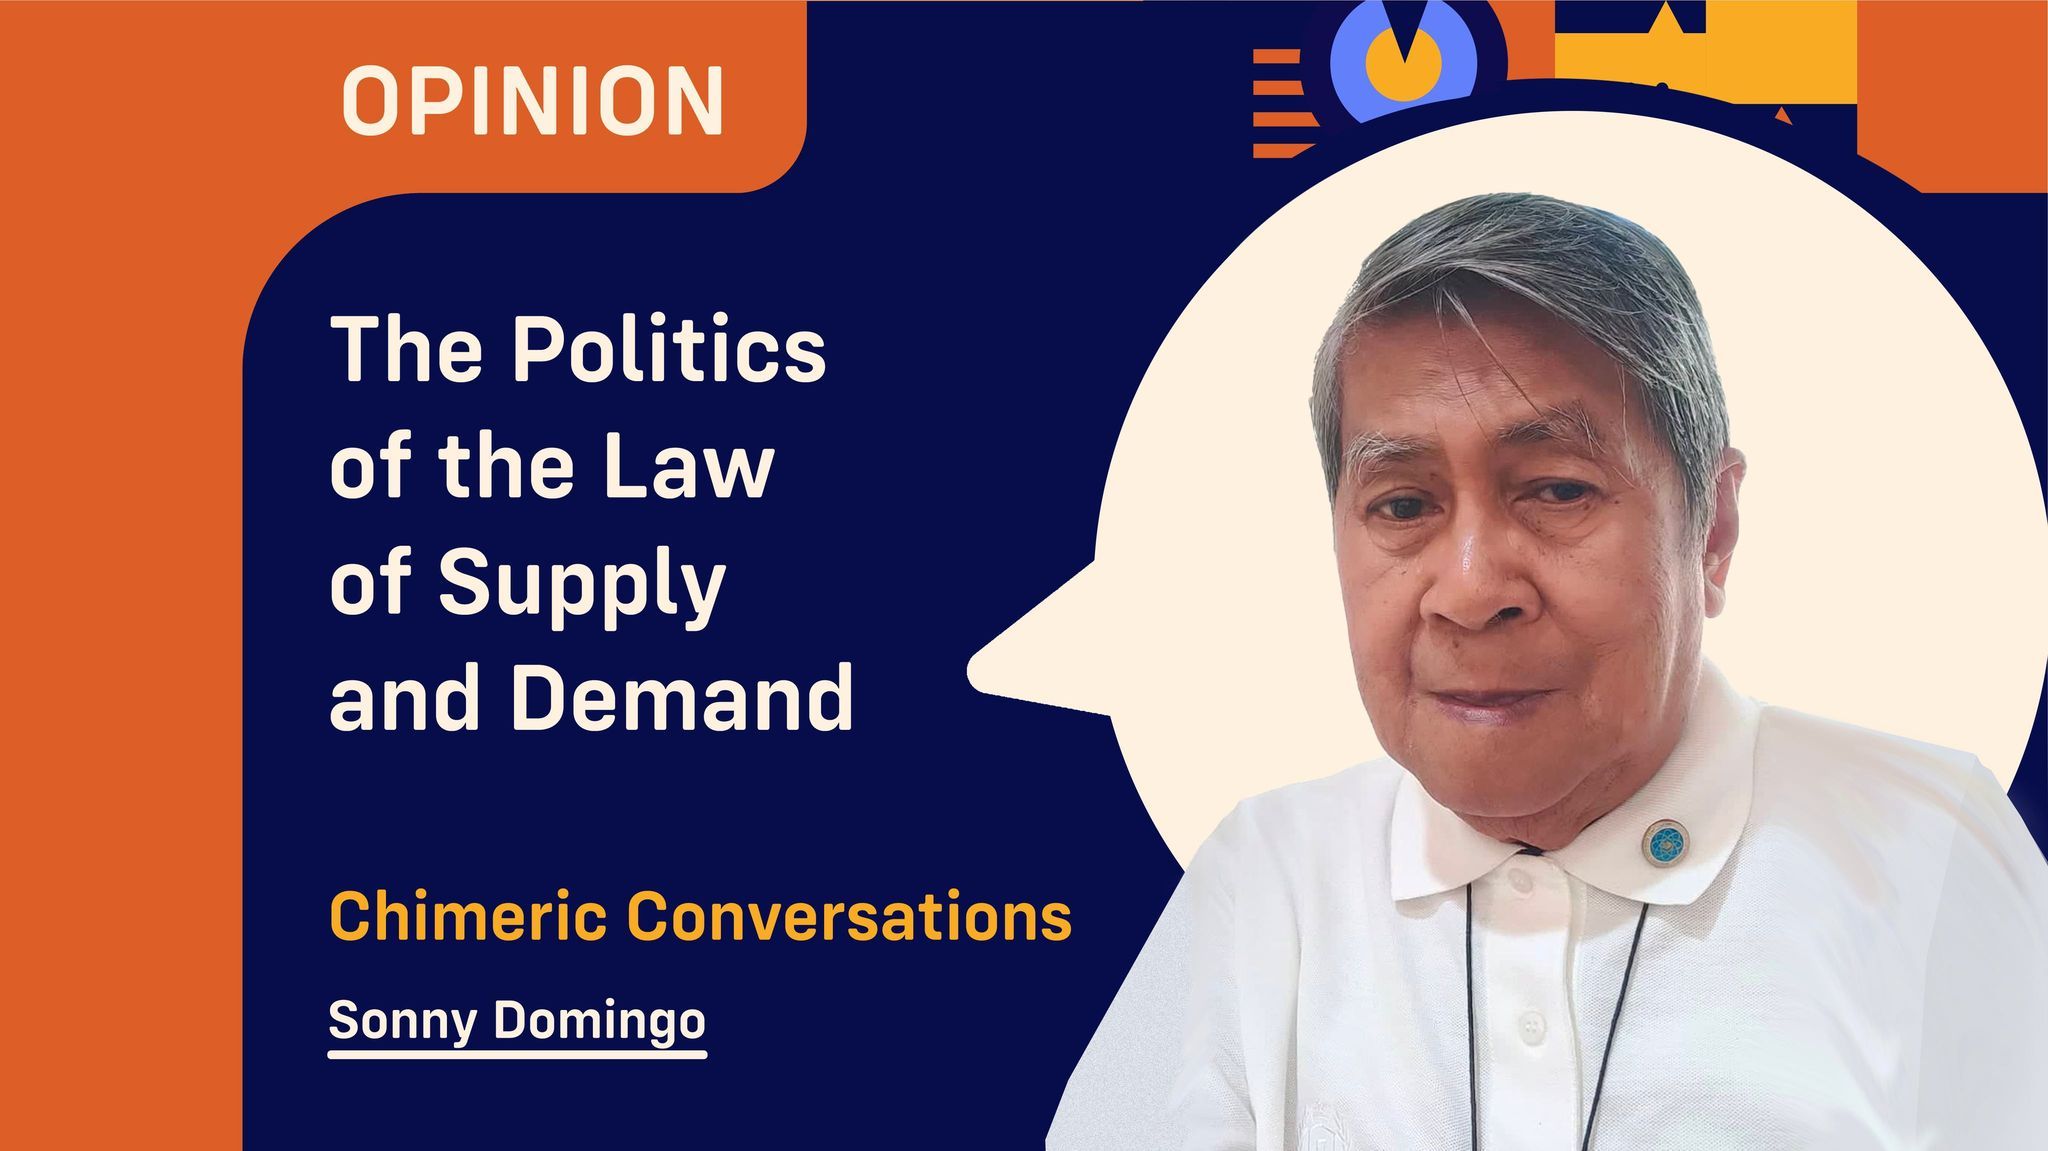 The Politics of the Law of Supply and Demand